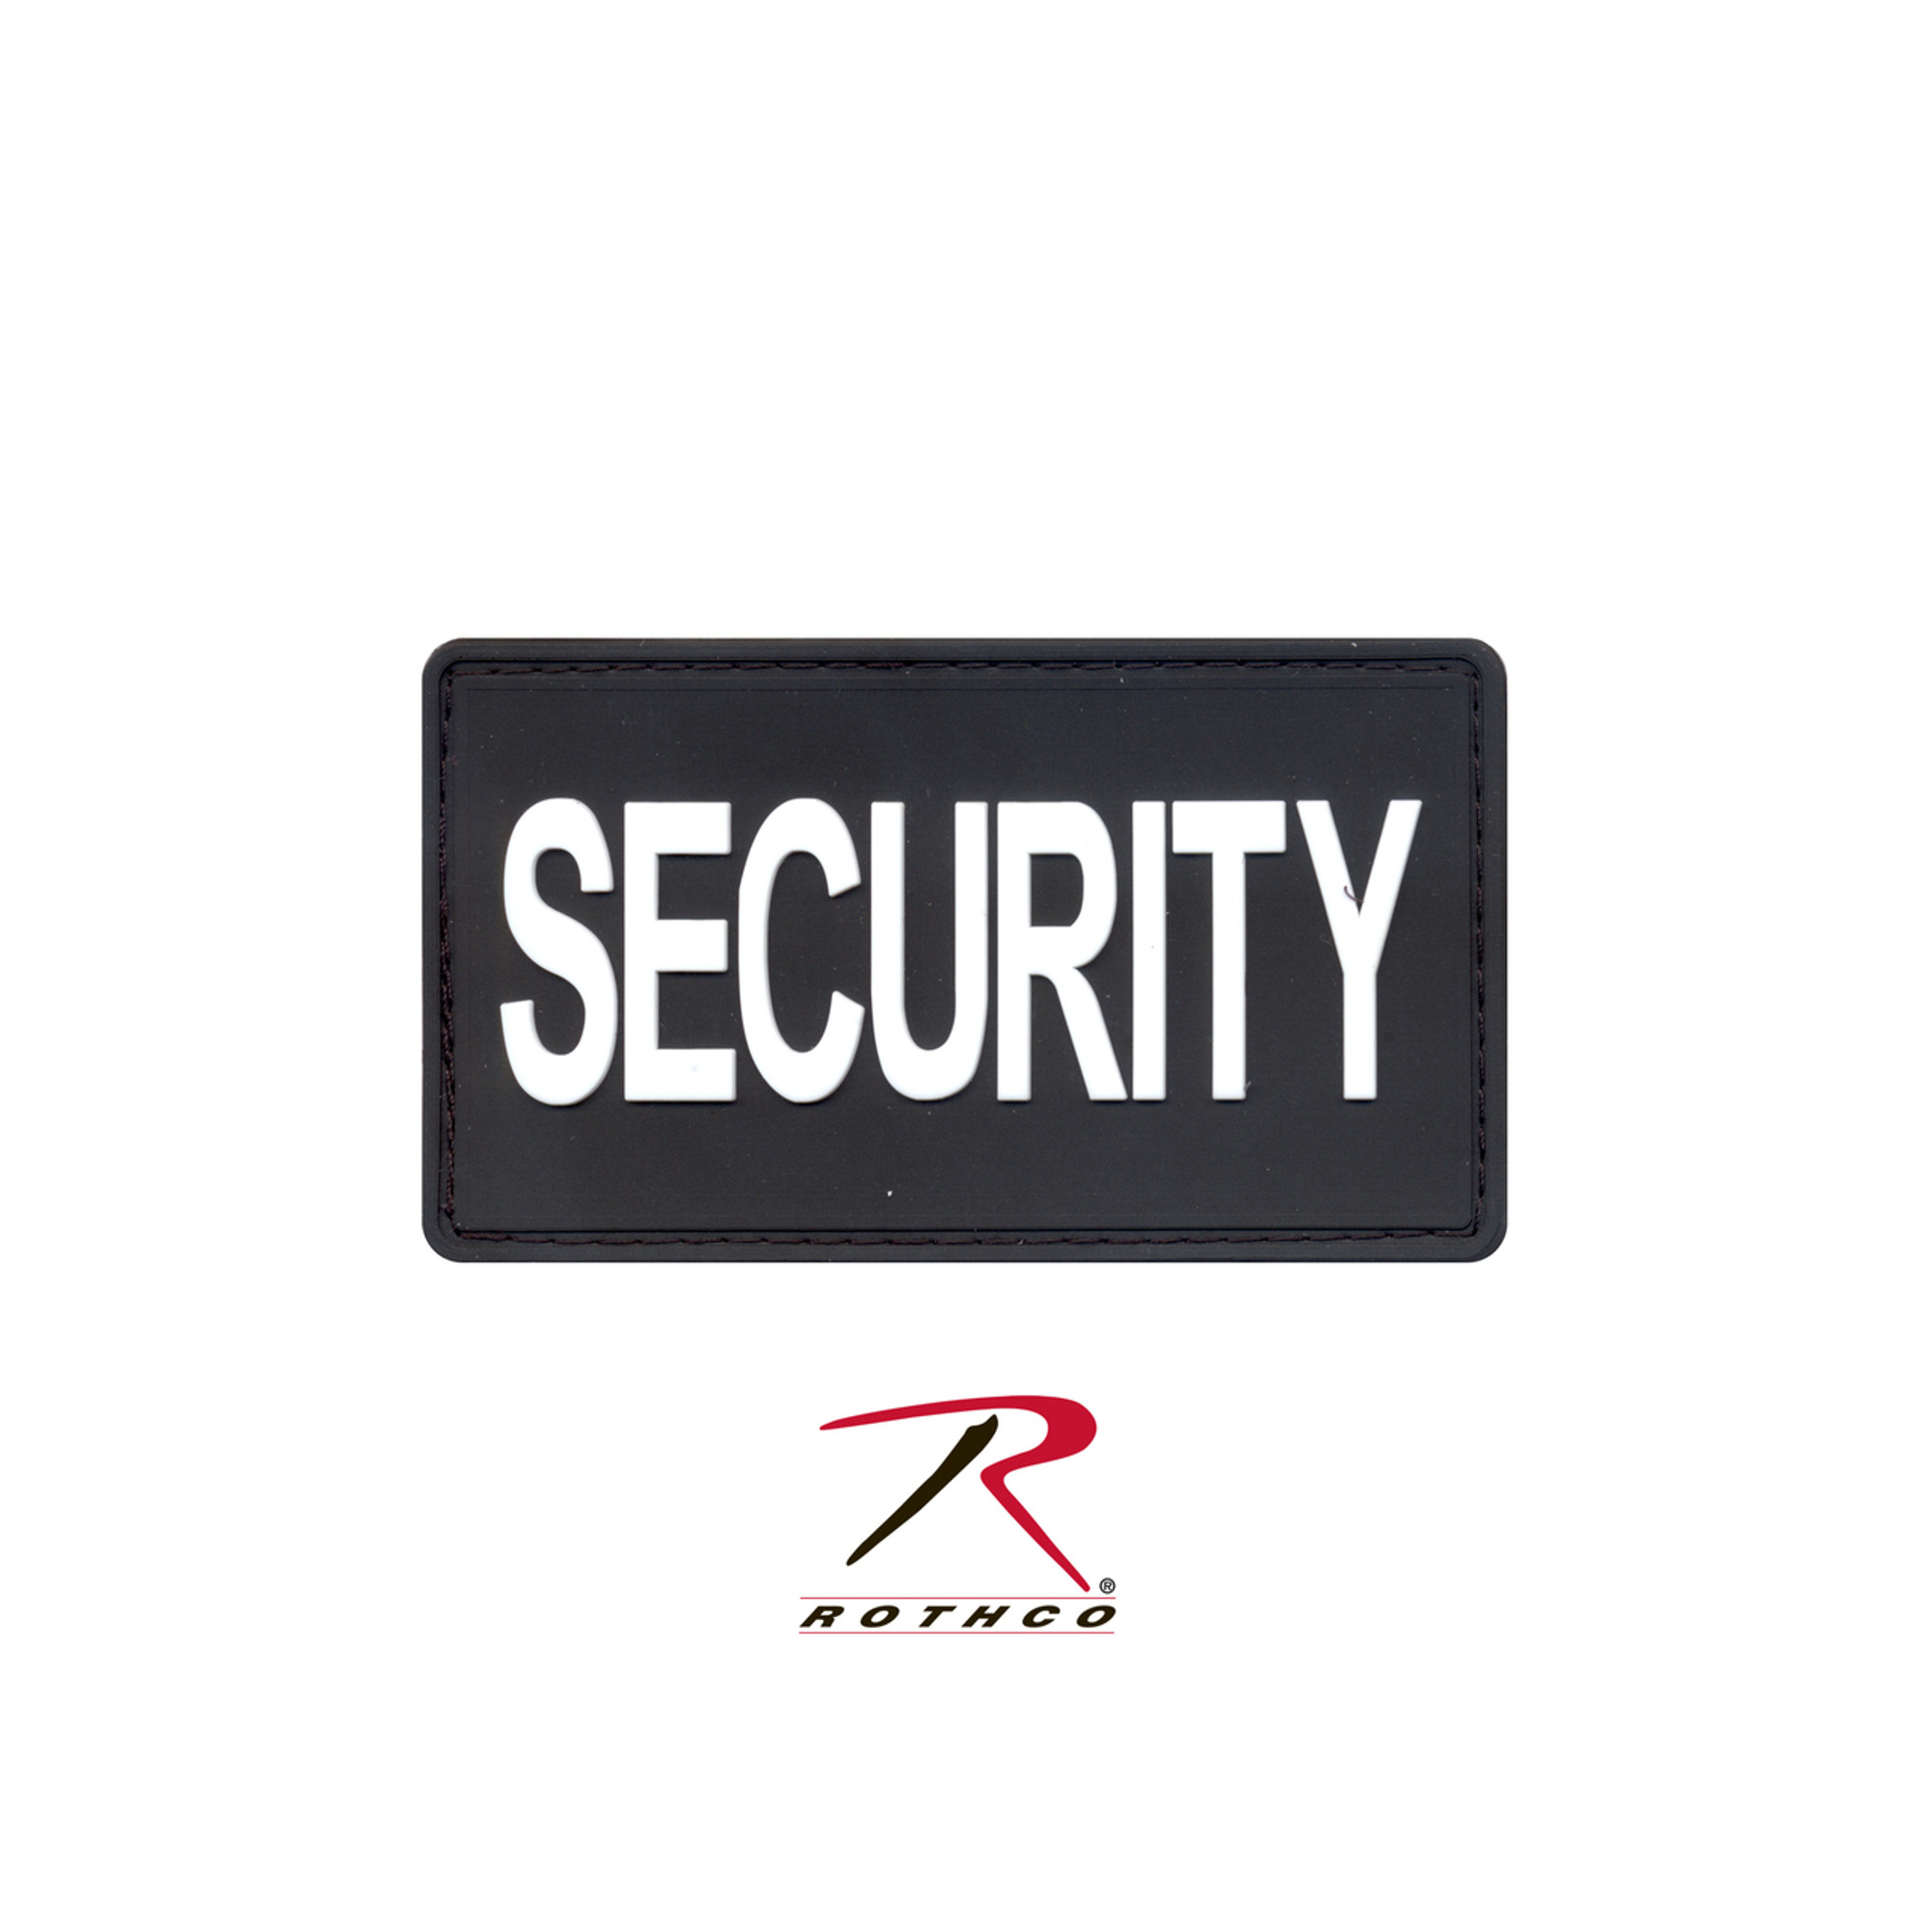  Rothco PVC Security Patch w/Hook Back : Clothing